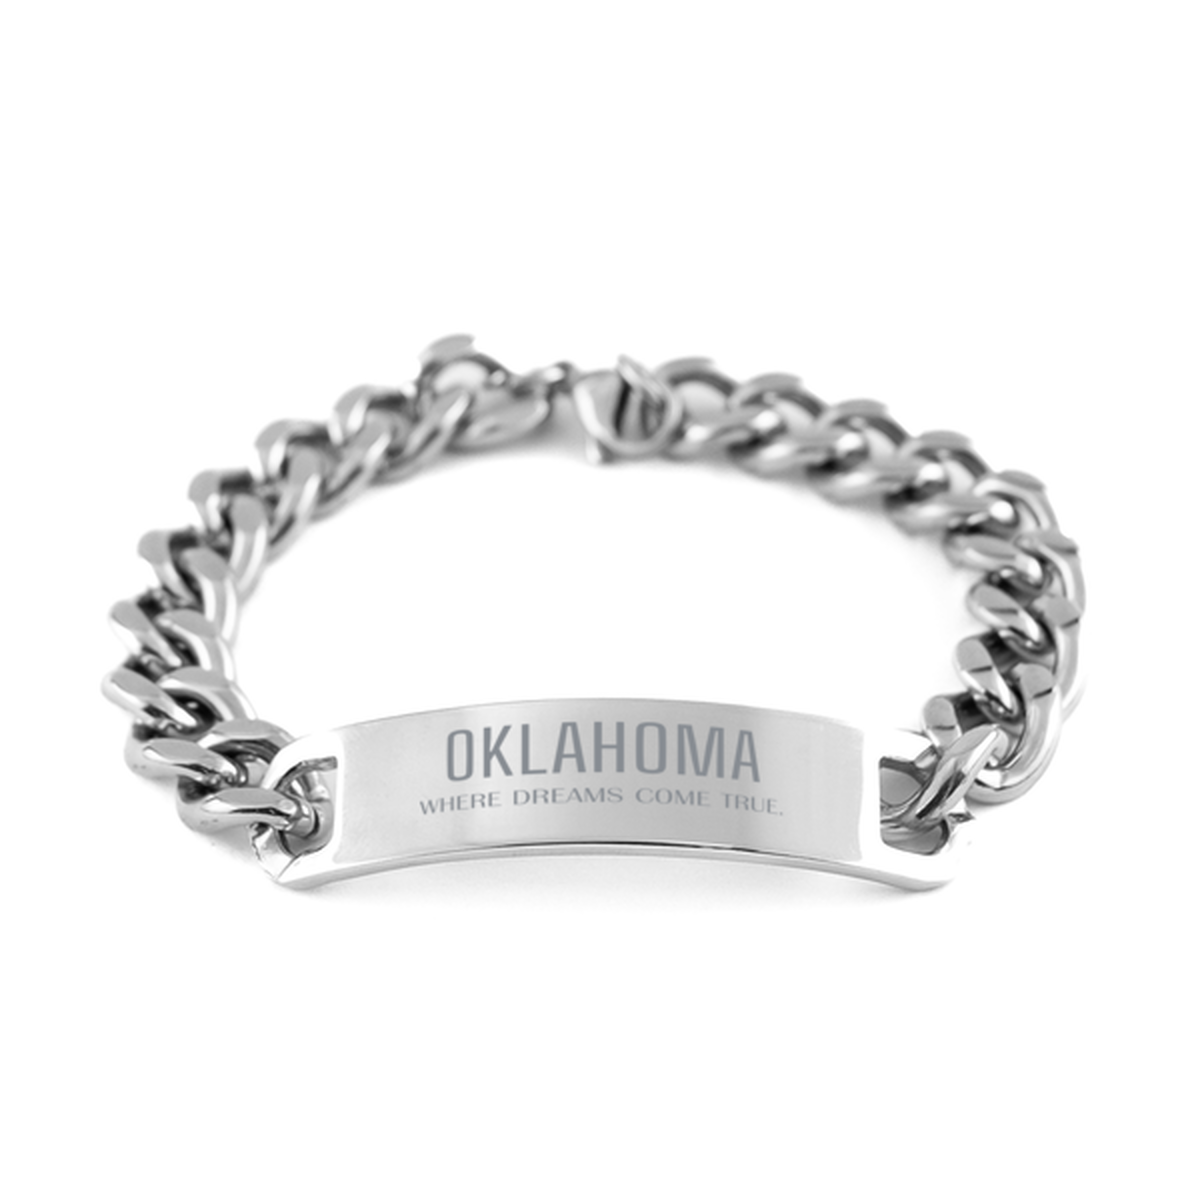 Love Oklahoma State Cuban Chain Stainless Steel Bracelet, Oklahoma Where dreams come true, Birthday Inspirational Gifts For Oklahoma Men, Women, Friends